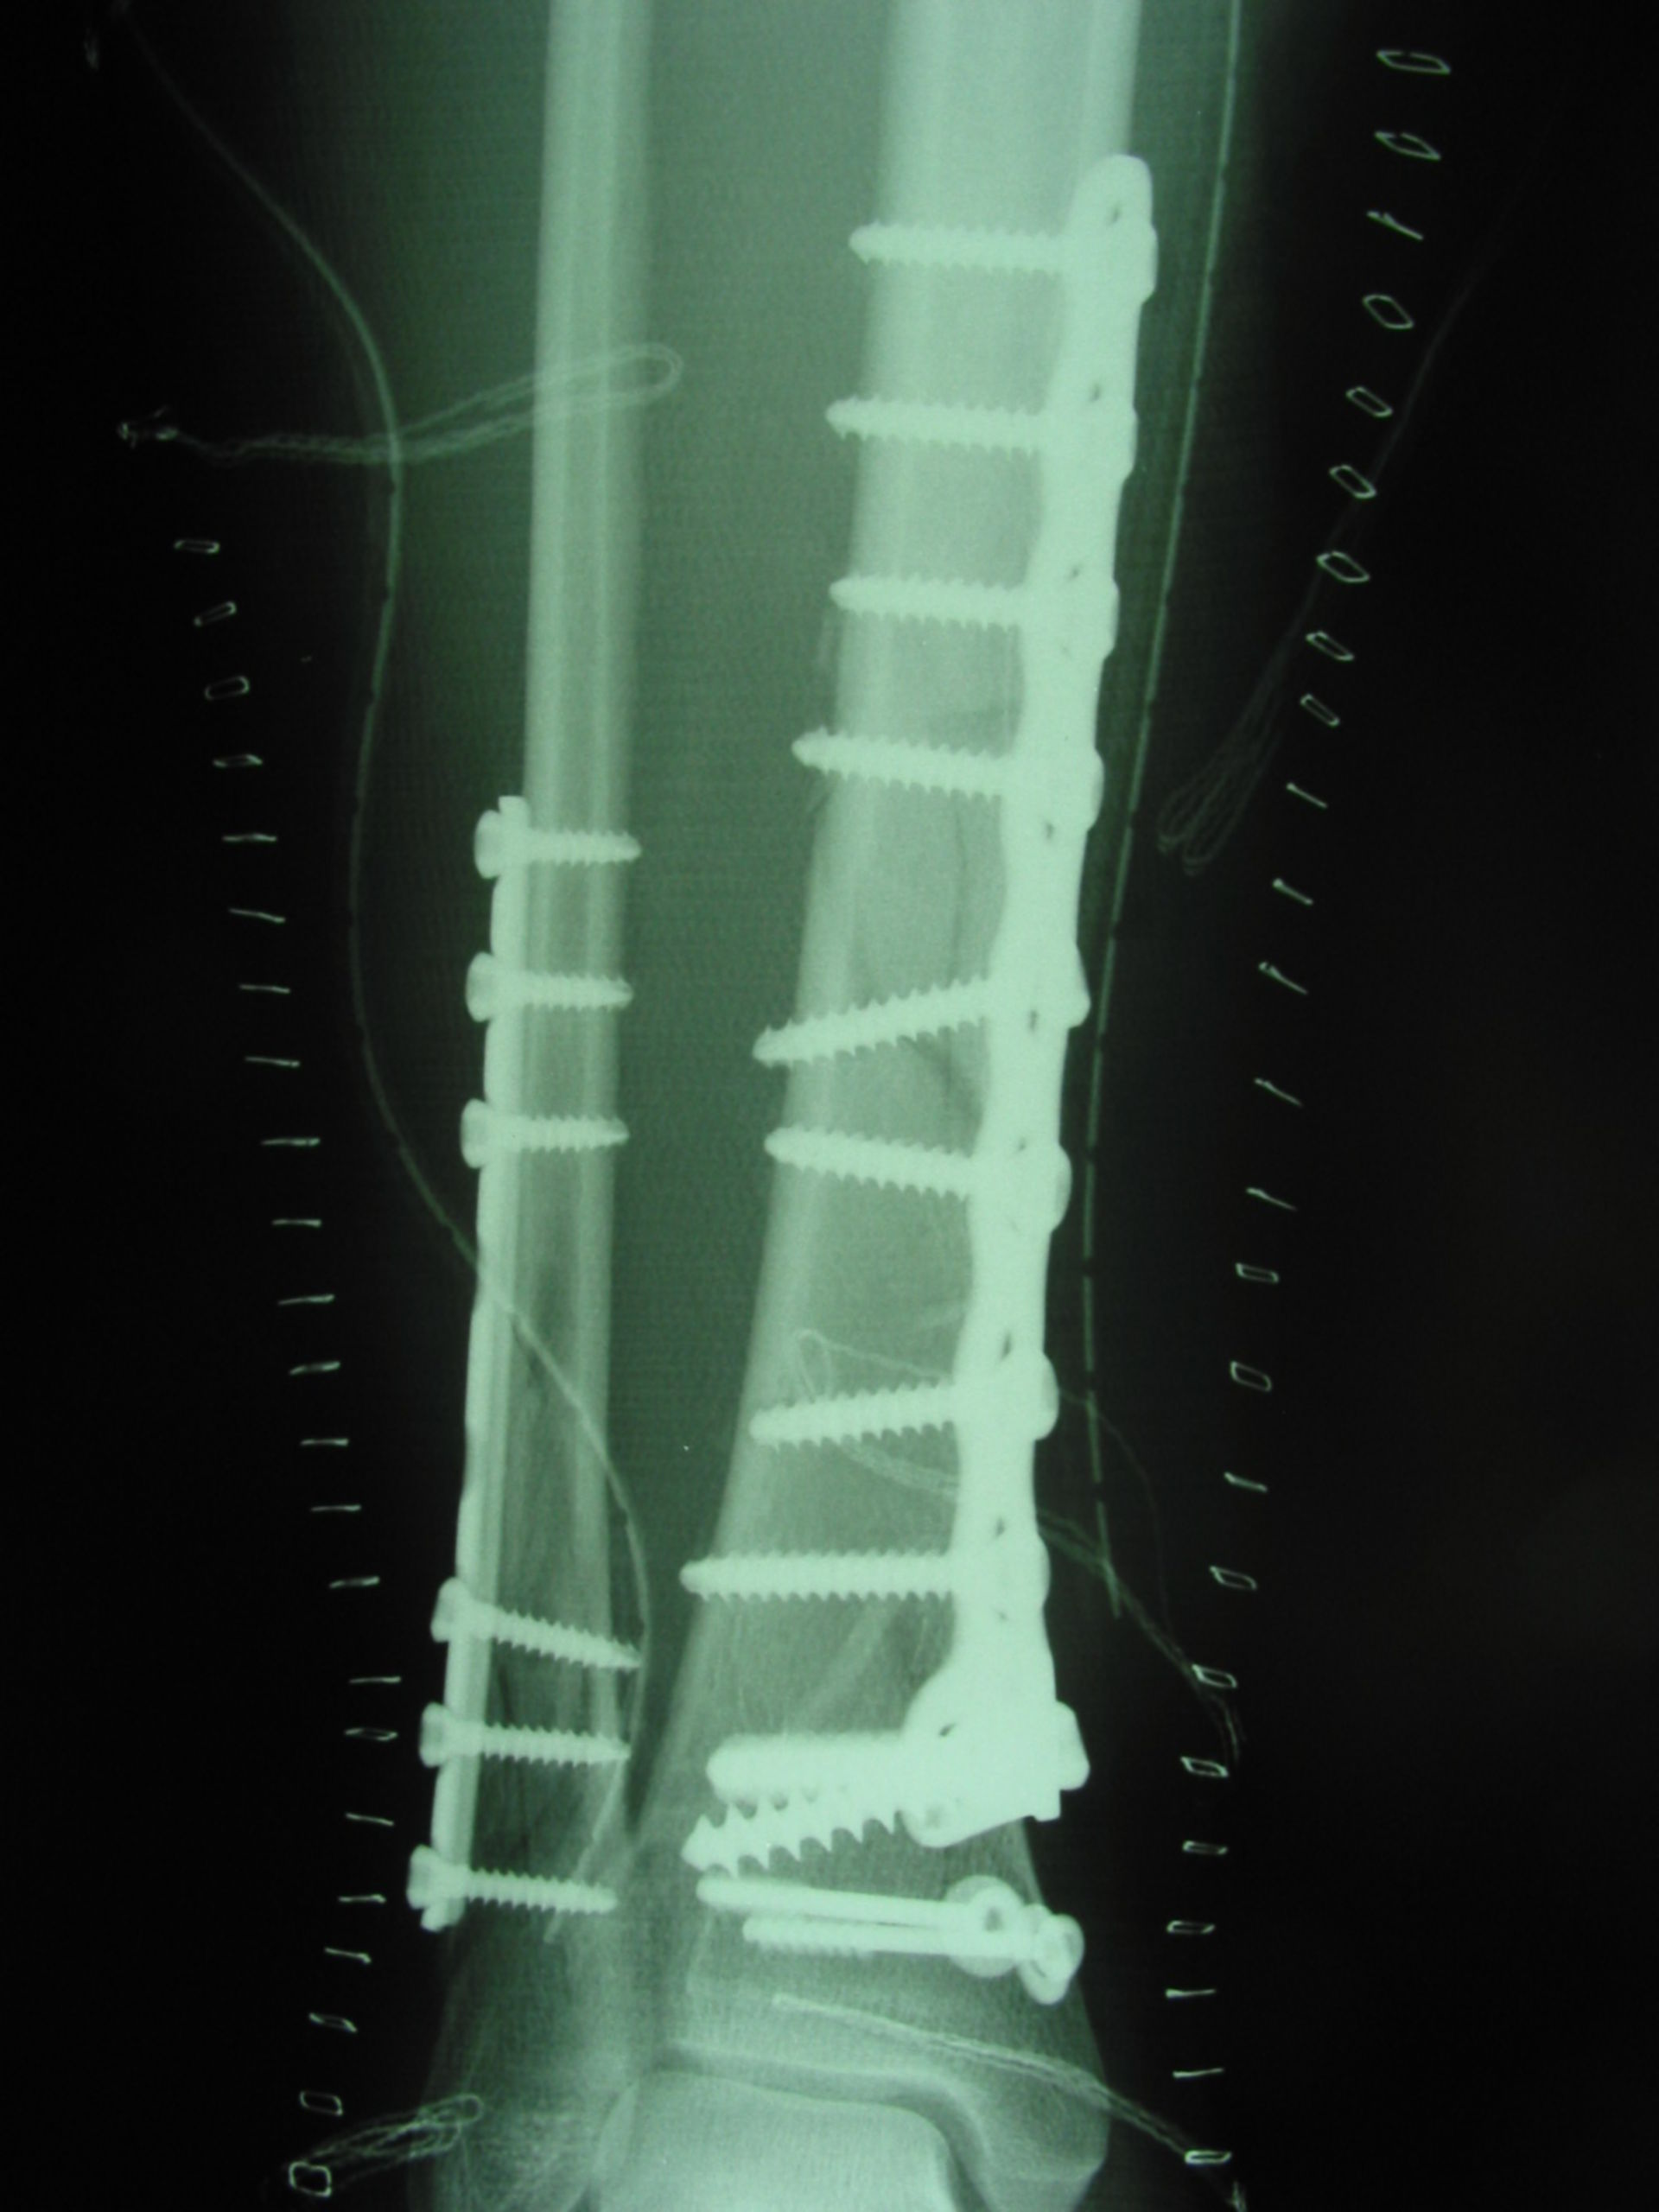 Lower leg fracture, plate fixation